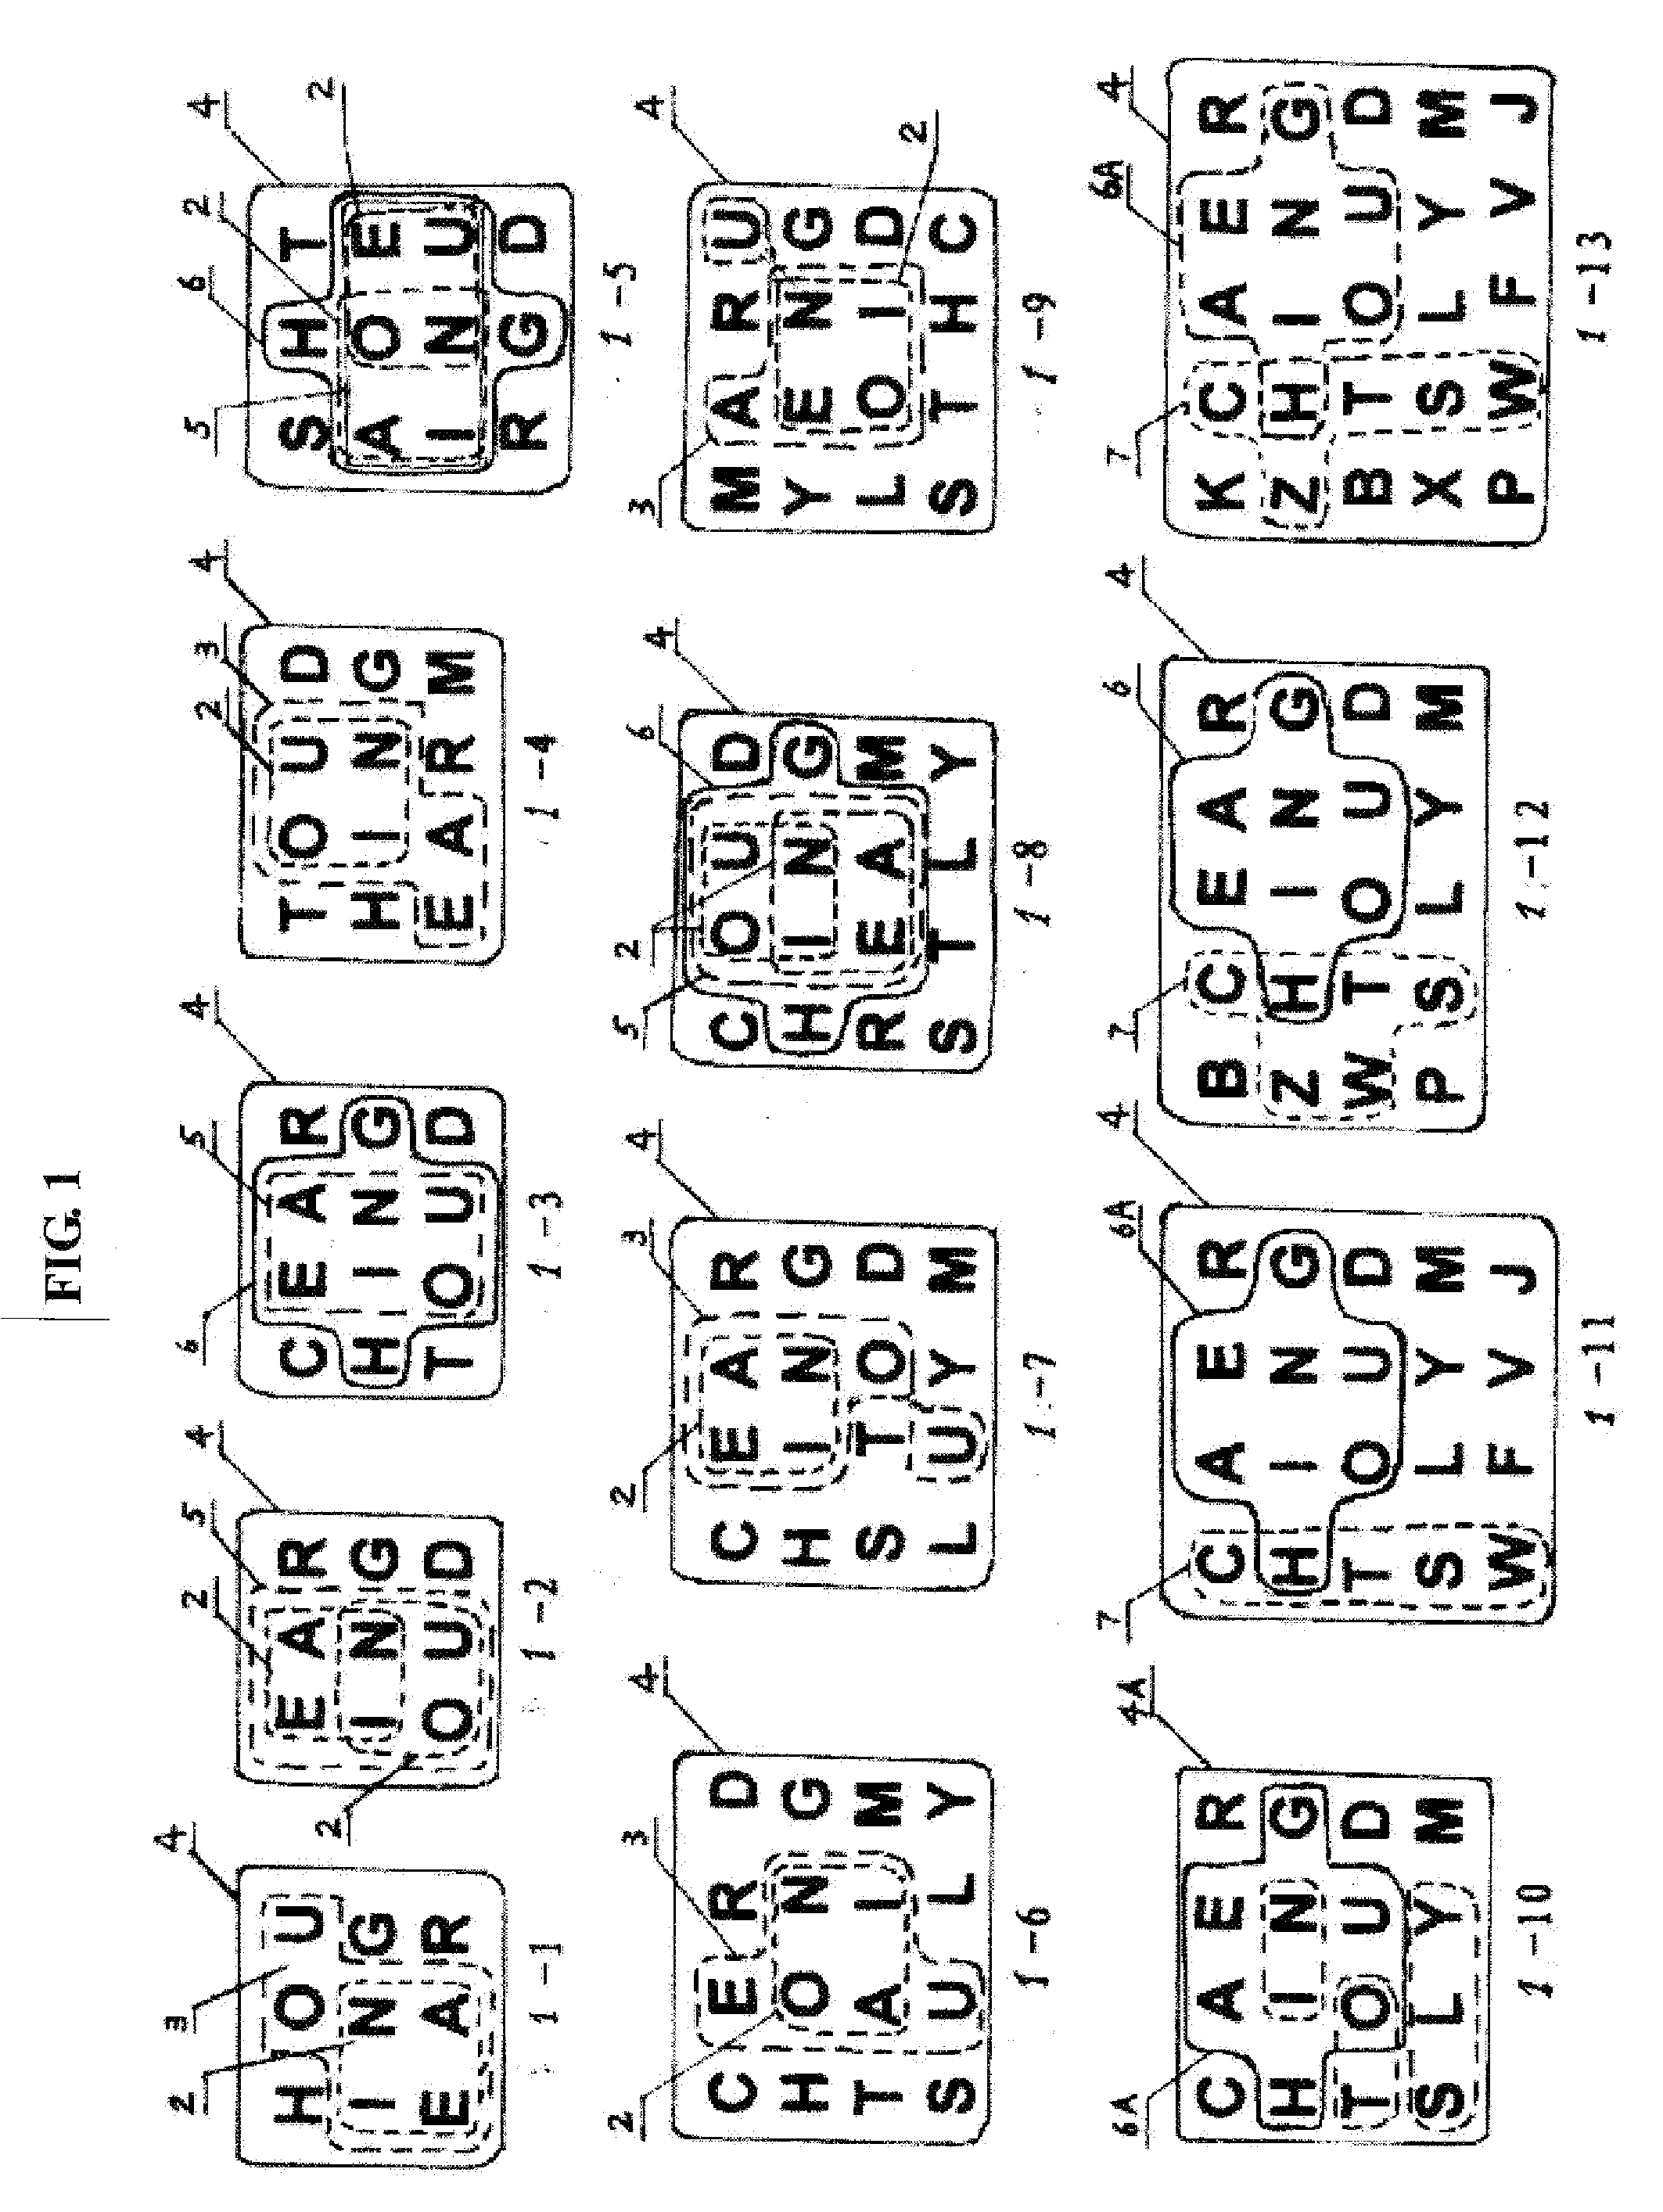 Keyboard used in the information terminal and arrangement thereof